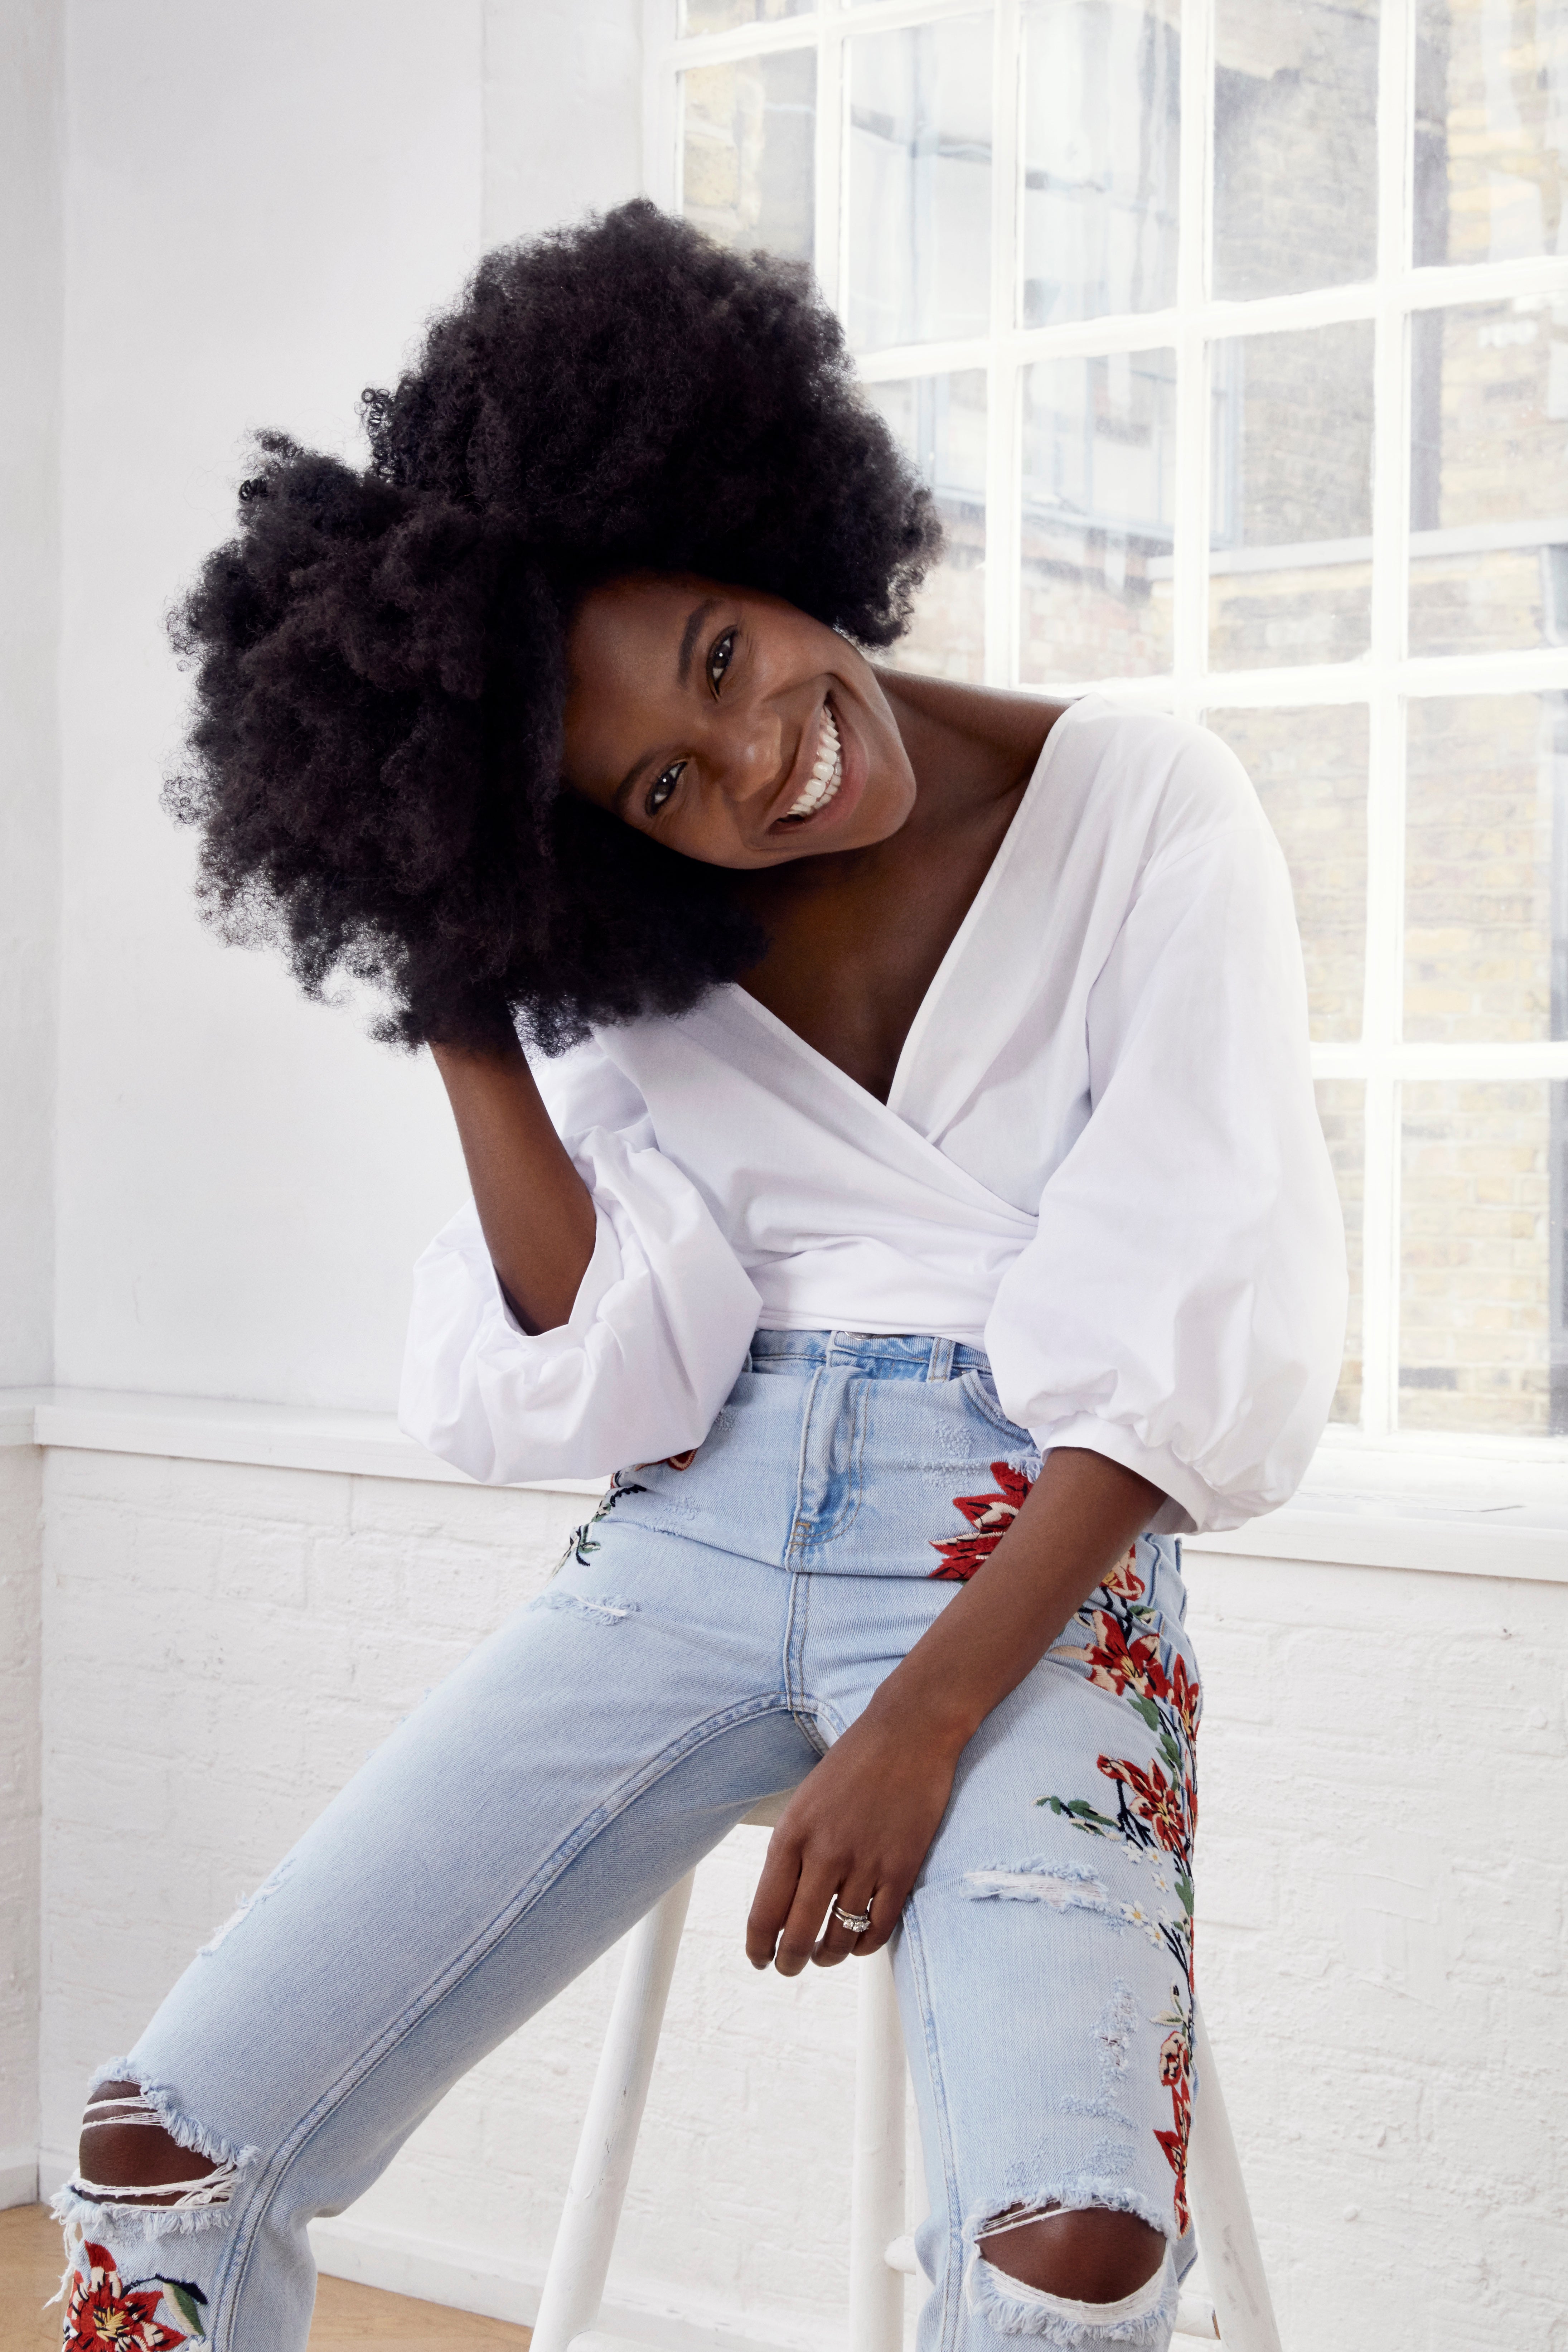 Blogger Freddie Harrel's Natural Extension Line Is Just What Black Women Need 
